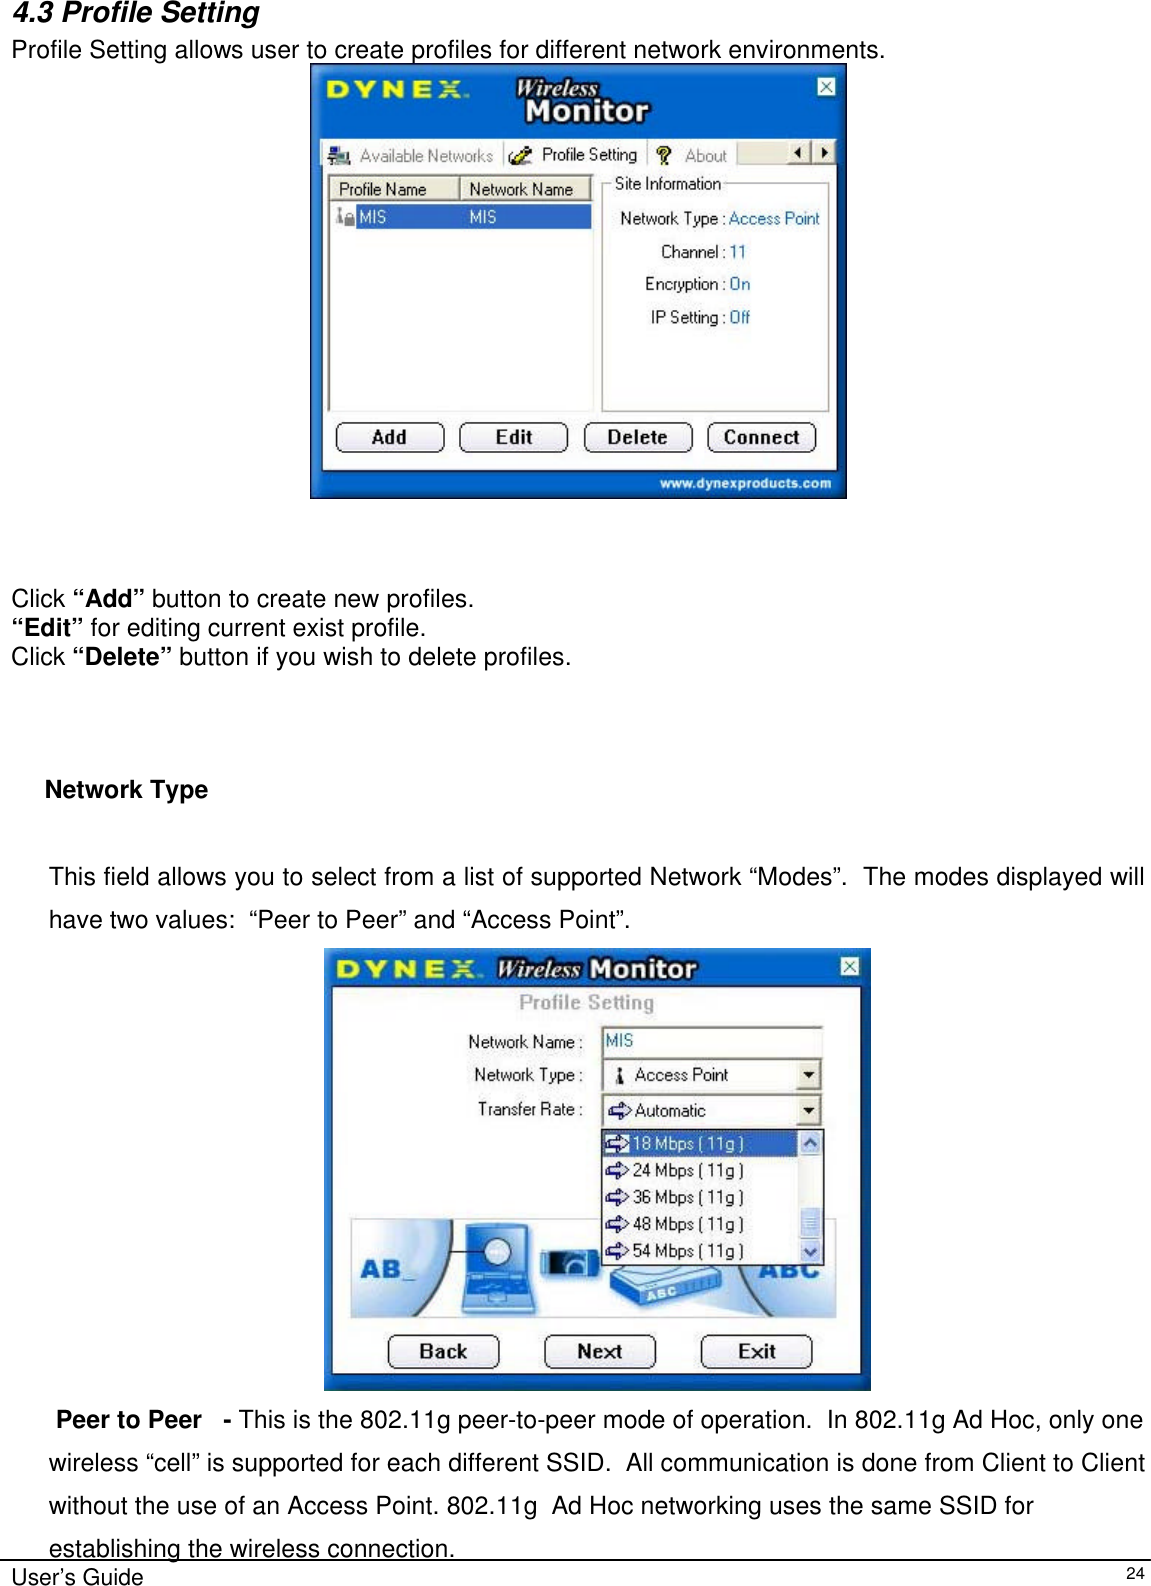                                                                                                                                                                              User’s Guide   24 4.3 Profile Setting  Profile Setting allows user to create profiles for different network environments.                                     Click “Add” button to create new profiles.  “Edit” for editing current exist profile. Click “Delete” button if you wish to delete profiles.                                        Network Type        This field allows you to select from a list of supported Network “Modes”.  The modes displayed will have two values:  “Peer to Peer” and “Access Point”.     Peer to Peer   - This is the 802.11g peer-to-peer mode of operation.  In 802.11g Ad Hoc, only one wireless “cell” is supported for each different SSID.  All communication is done from Client to Client without the use of an Access Point. 802.11g  Ad Hoc networking uses the same SSID for establishing the wireless connection. 